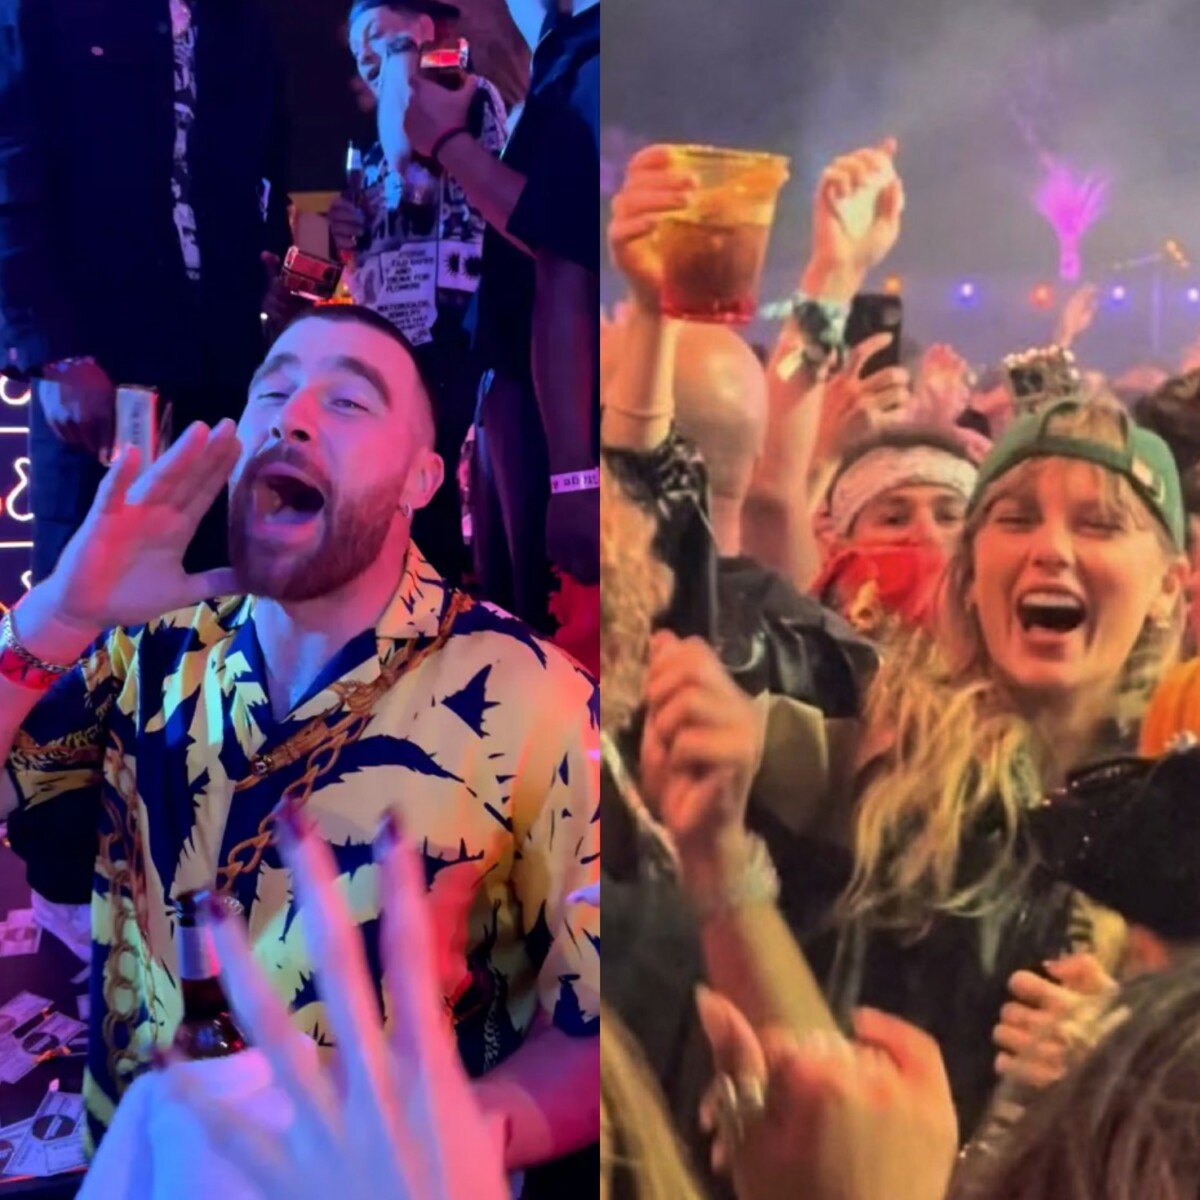 a high-energy party duo ❤. It looks like they were having a great time!